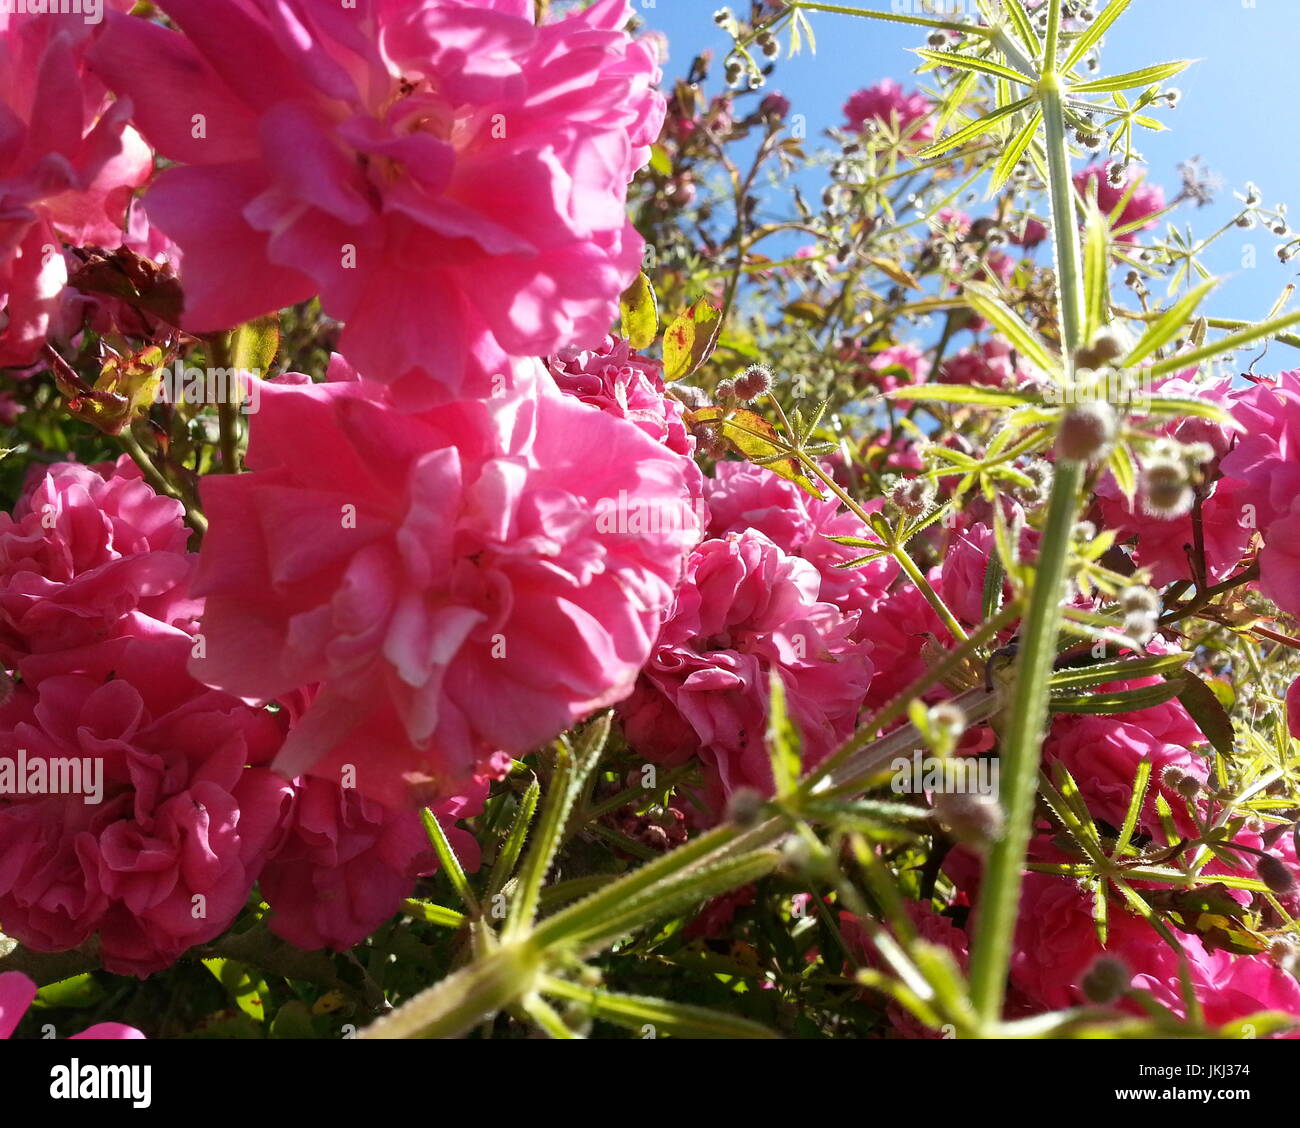 Pink Flowers Against a Blue Sky Stock Photo